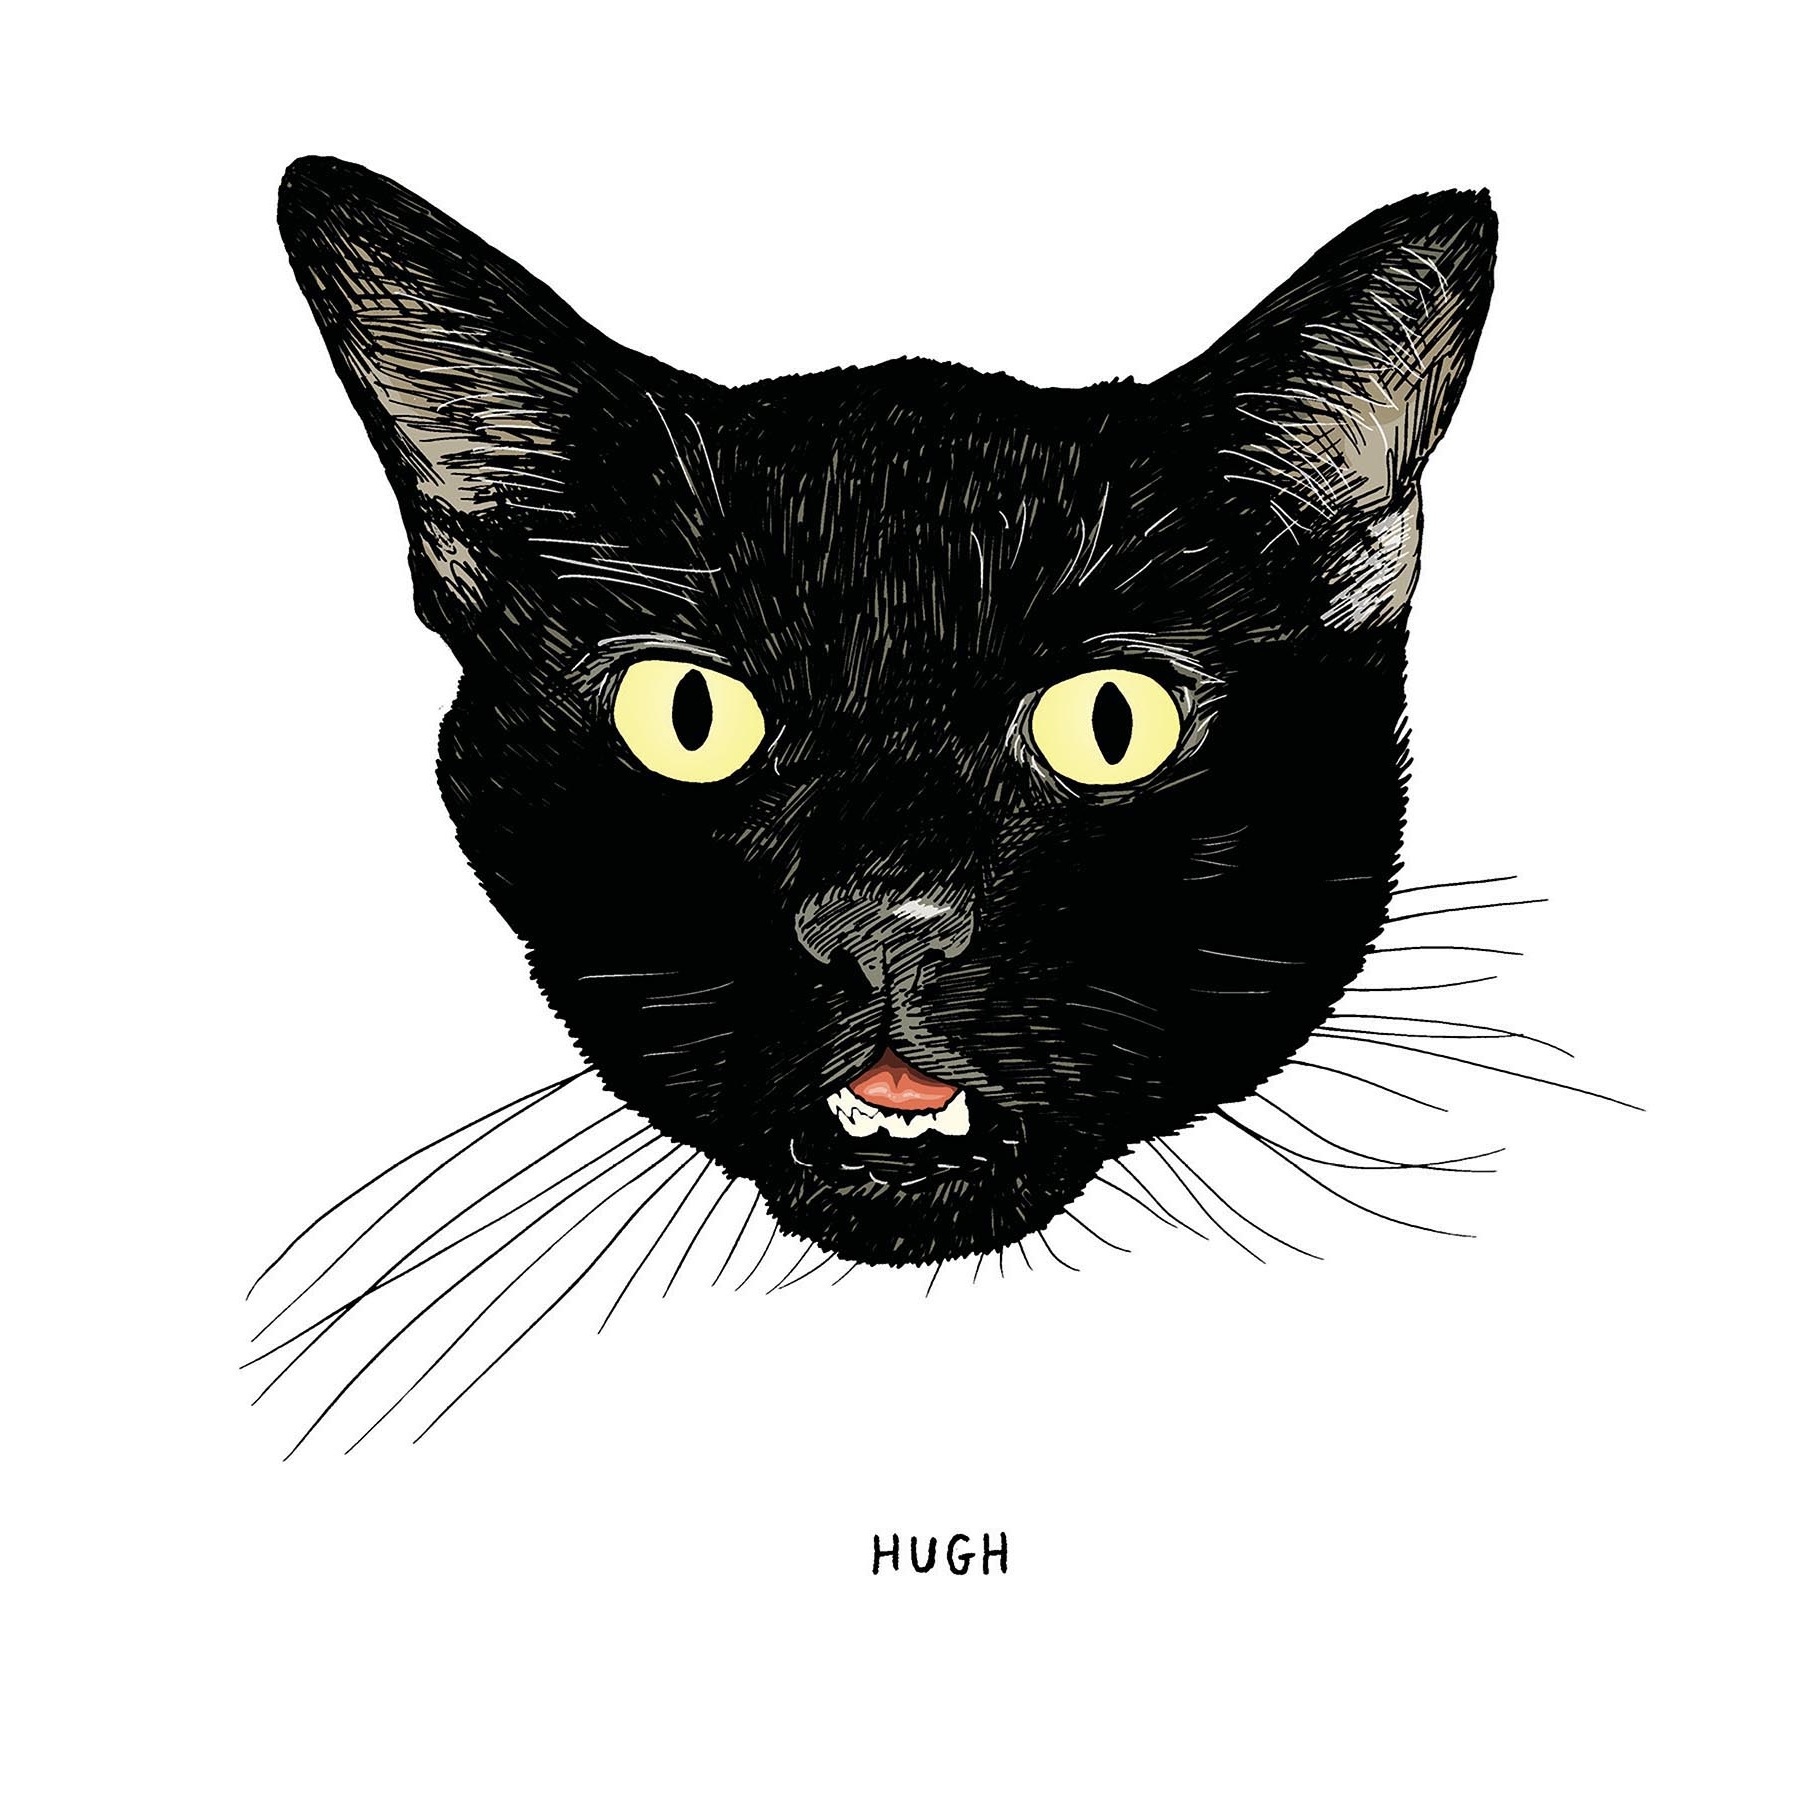 An Illustrated Study of Black Cats, the 